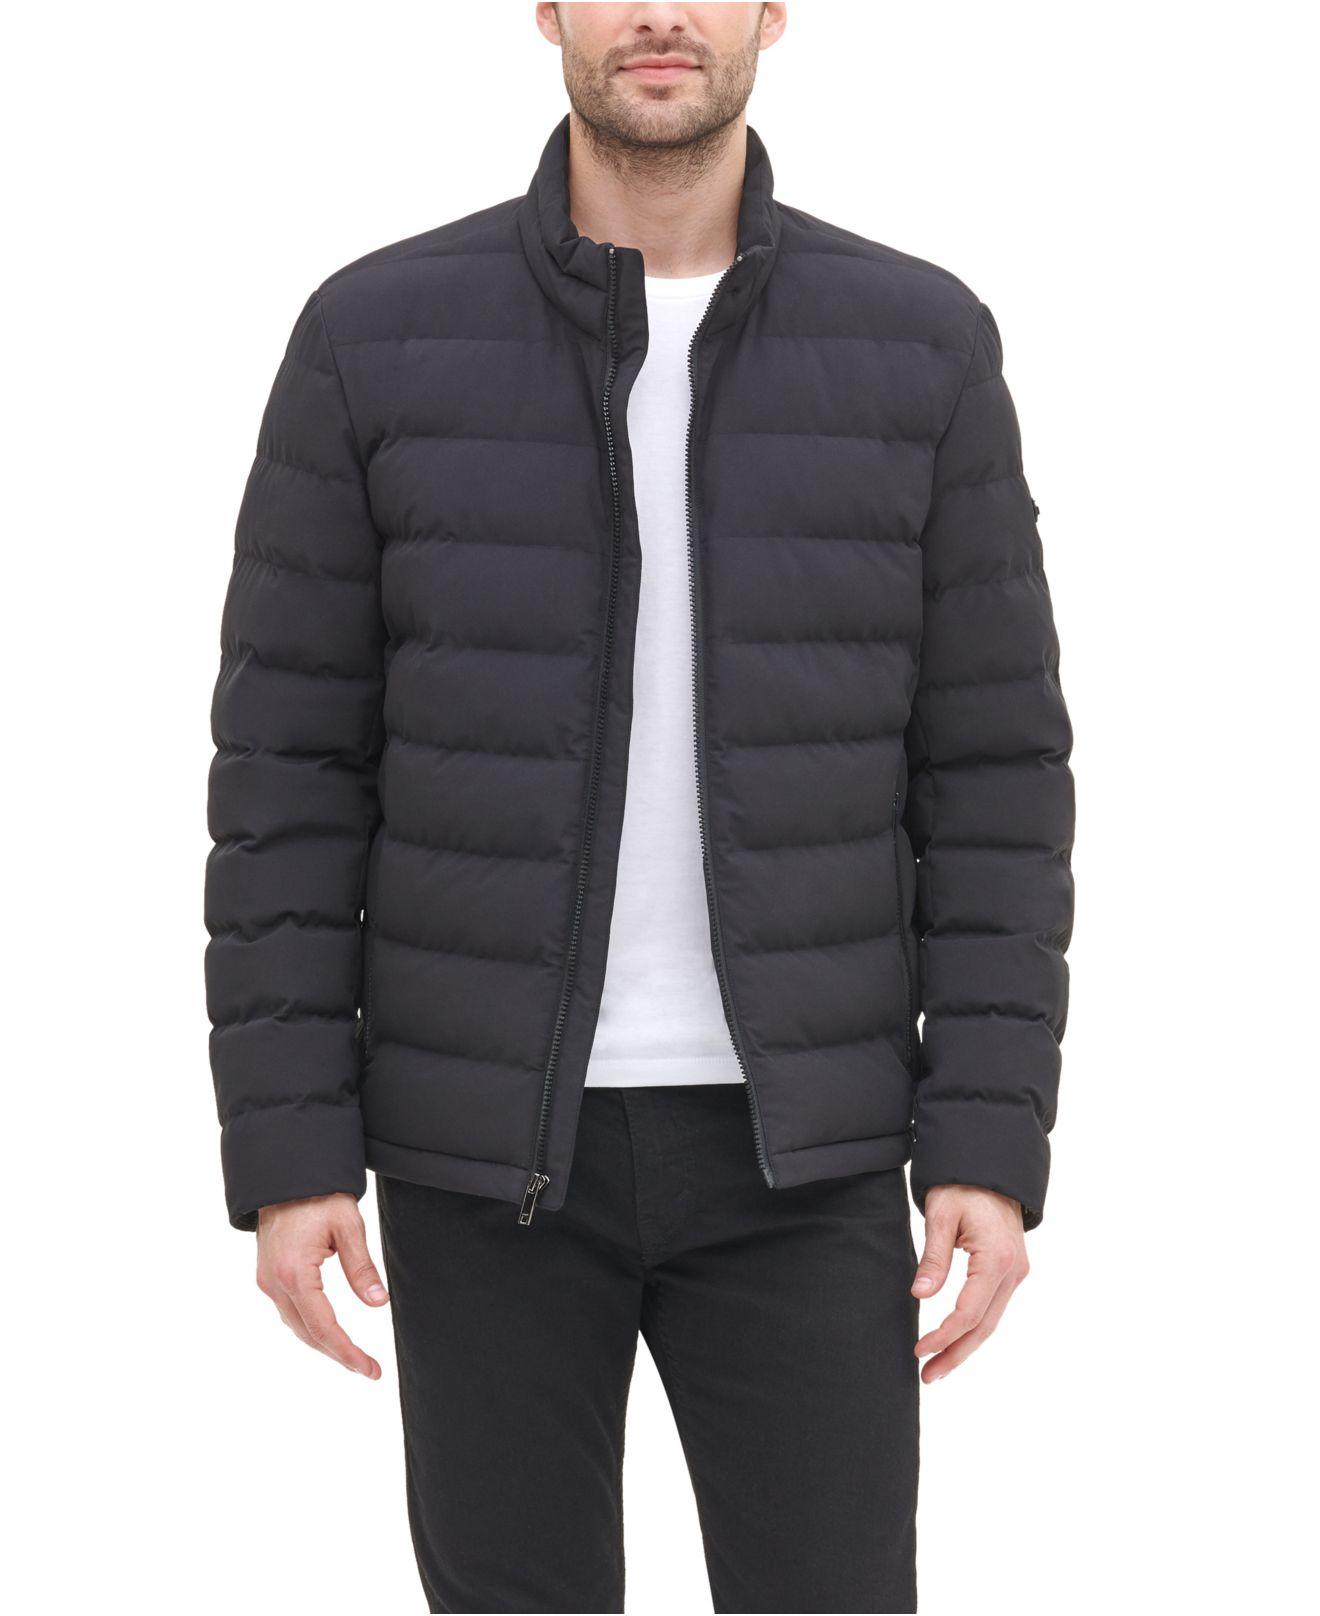 DKNY Synthetic Quilted Puffer Jacket in Black for Men - Lyst